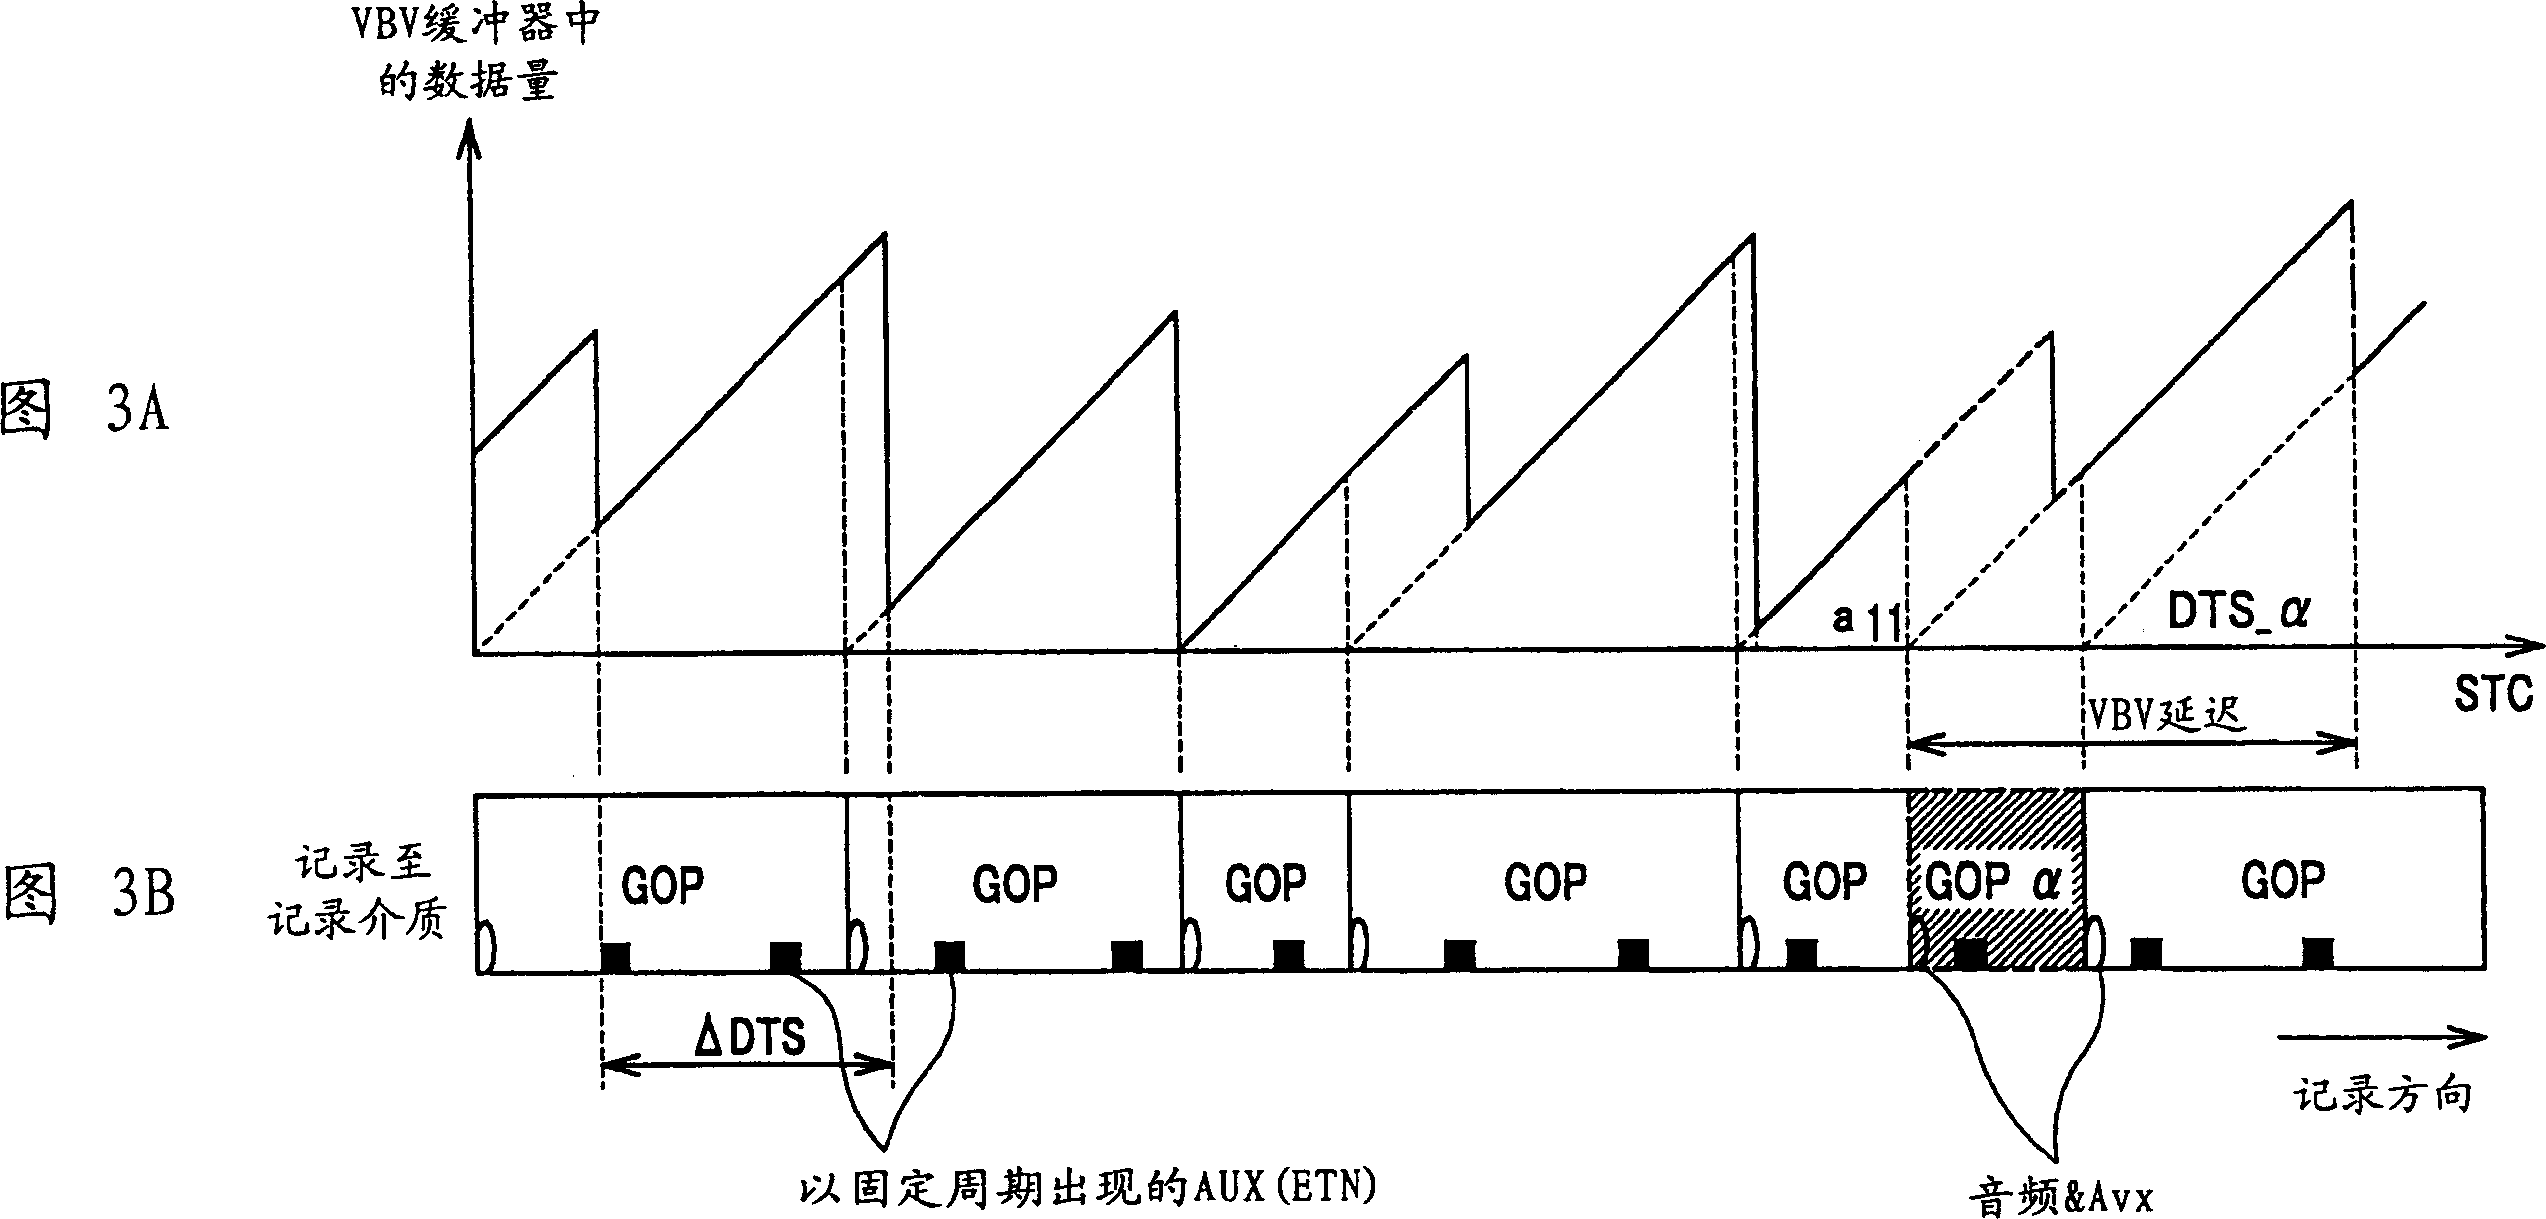 Picture data reproducing apparatus and method